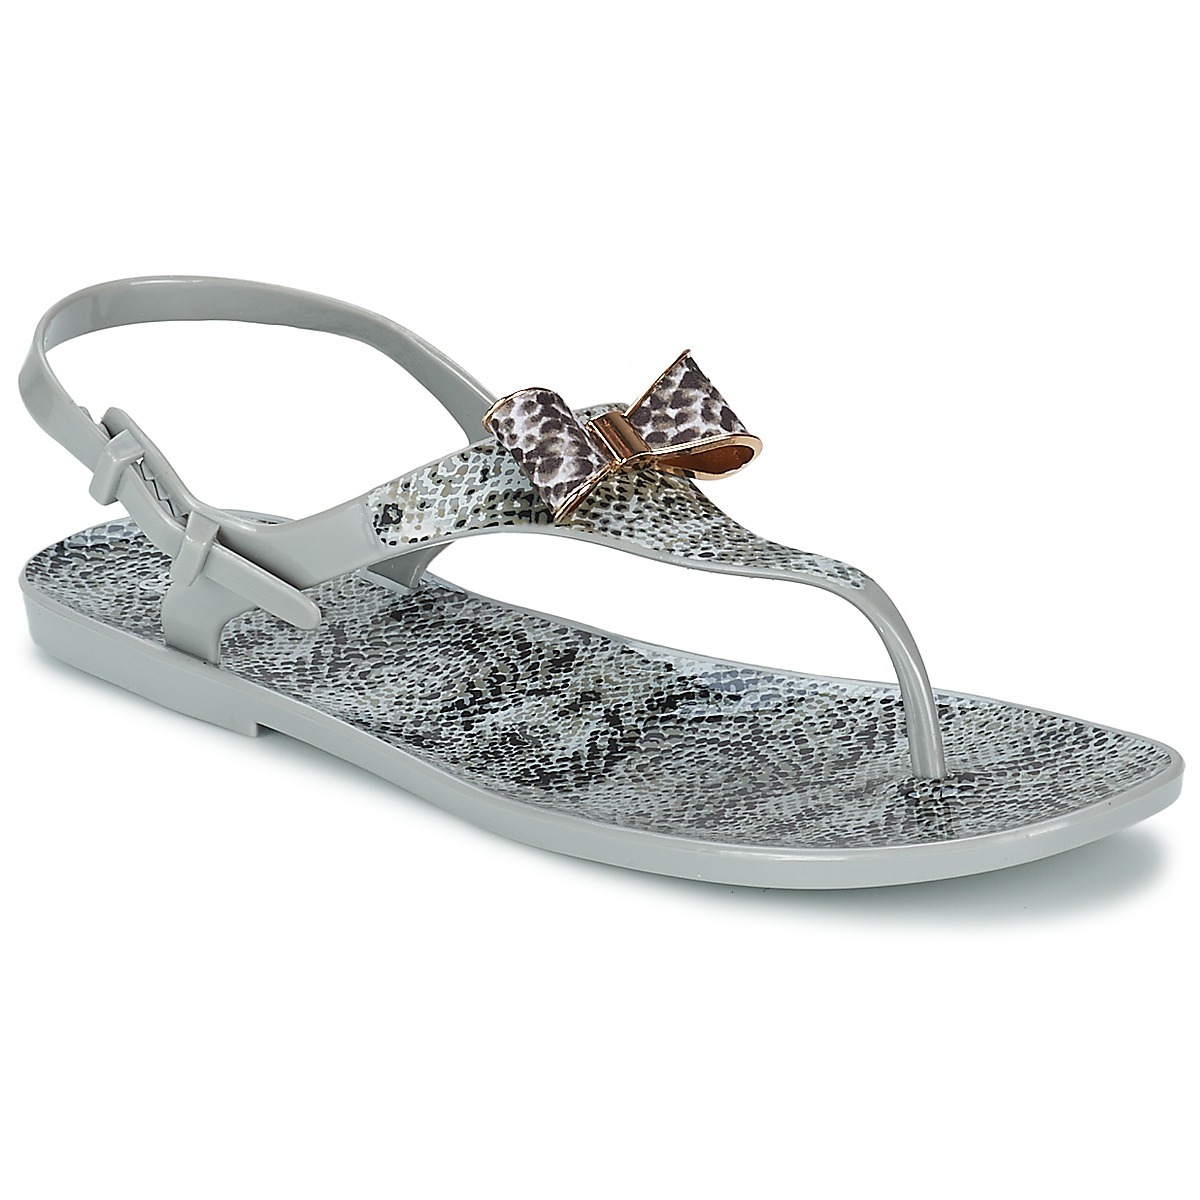 Colors of California - Grey Sandals for Women at Spartoo GOOFASH